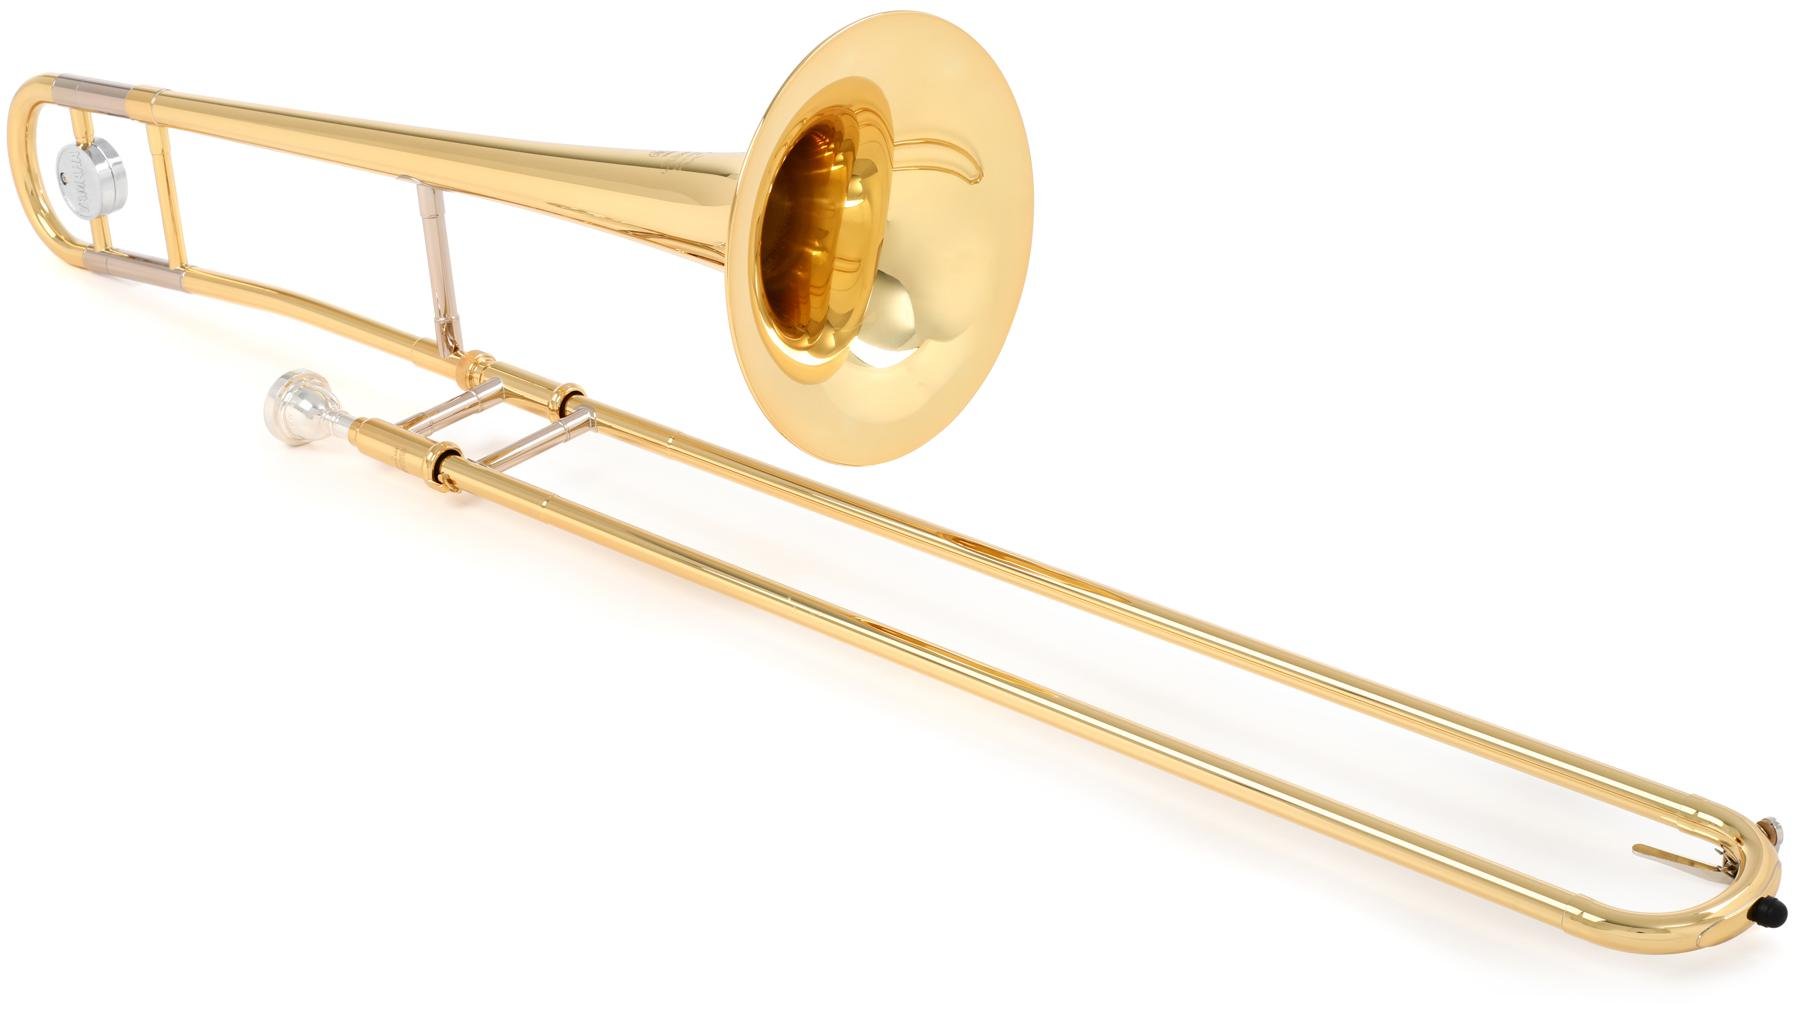 Detail Pictures Of A Trombone Nomer 8